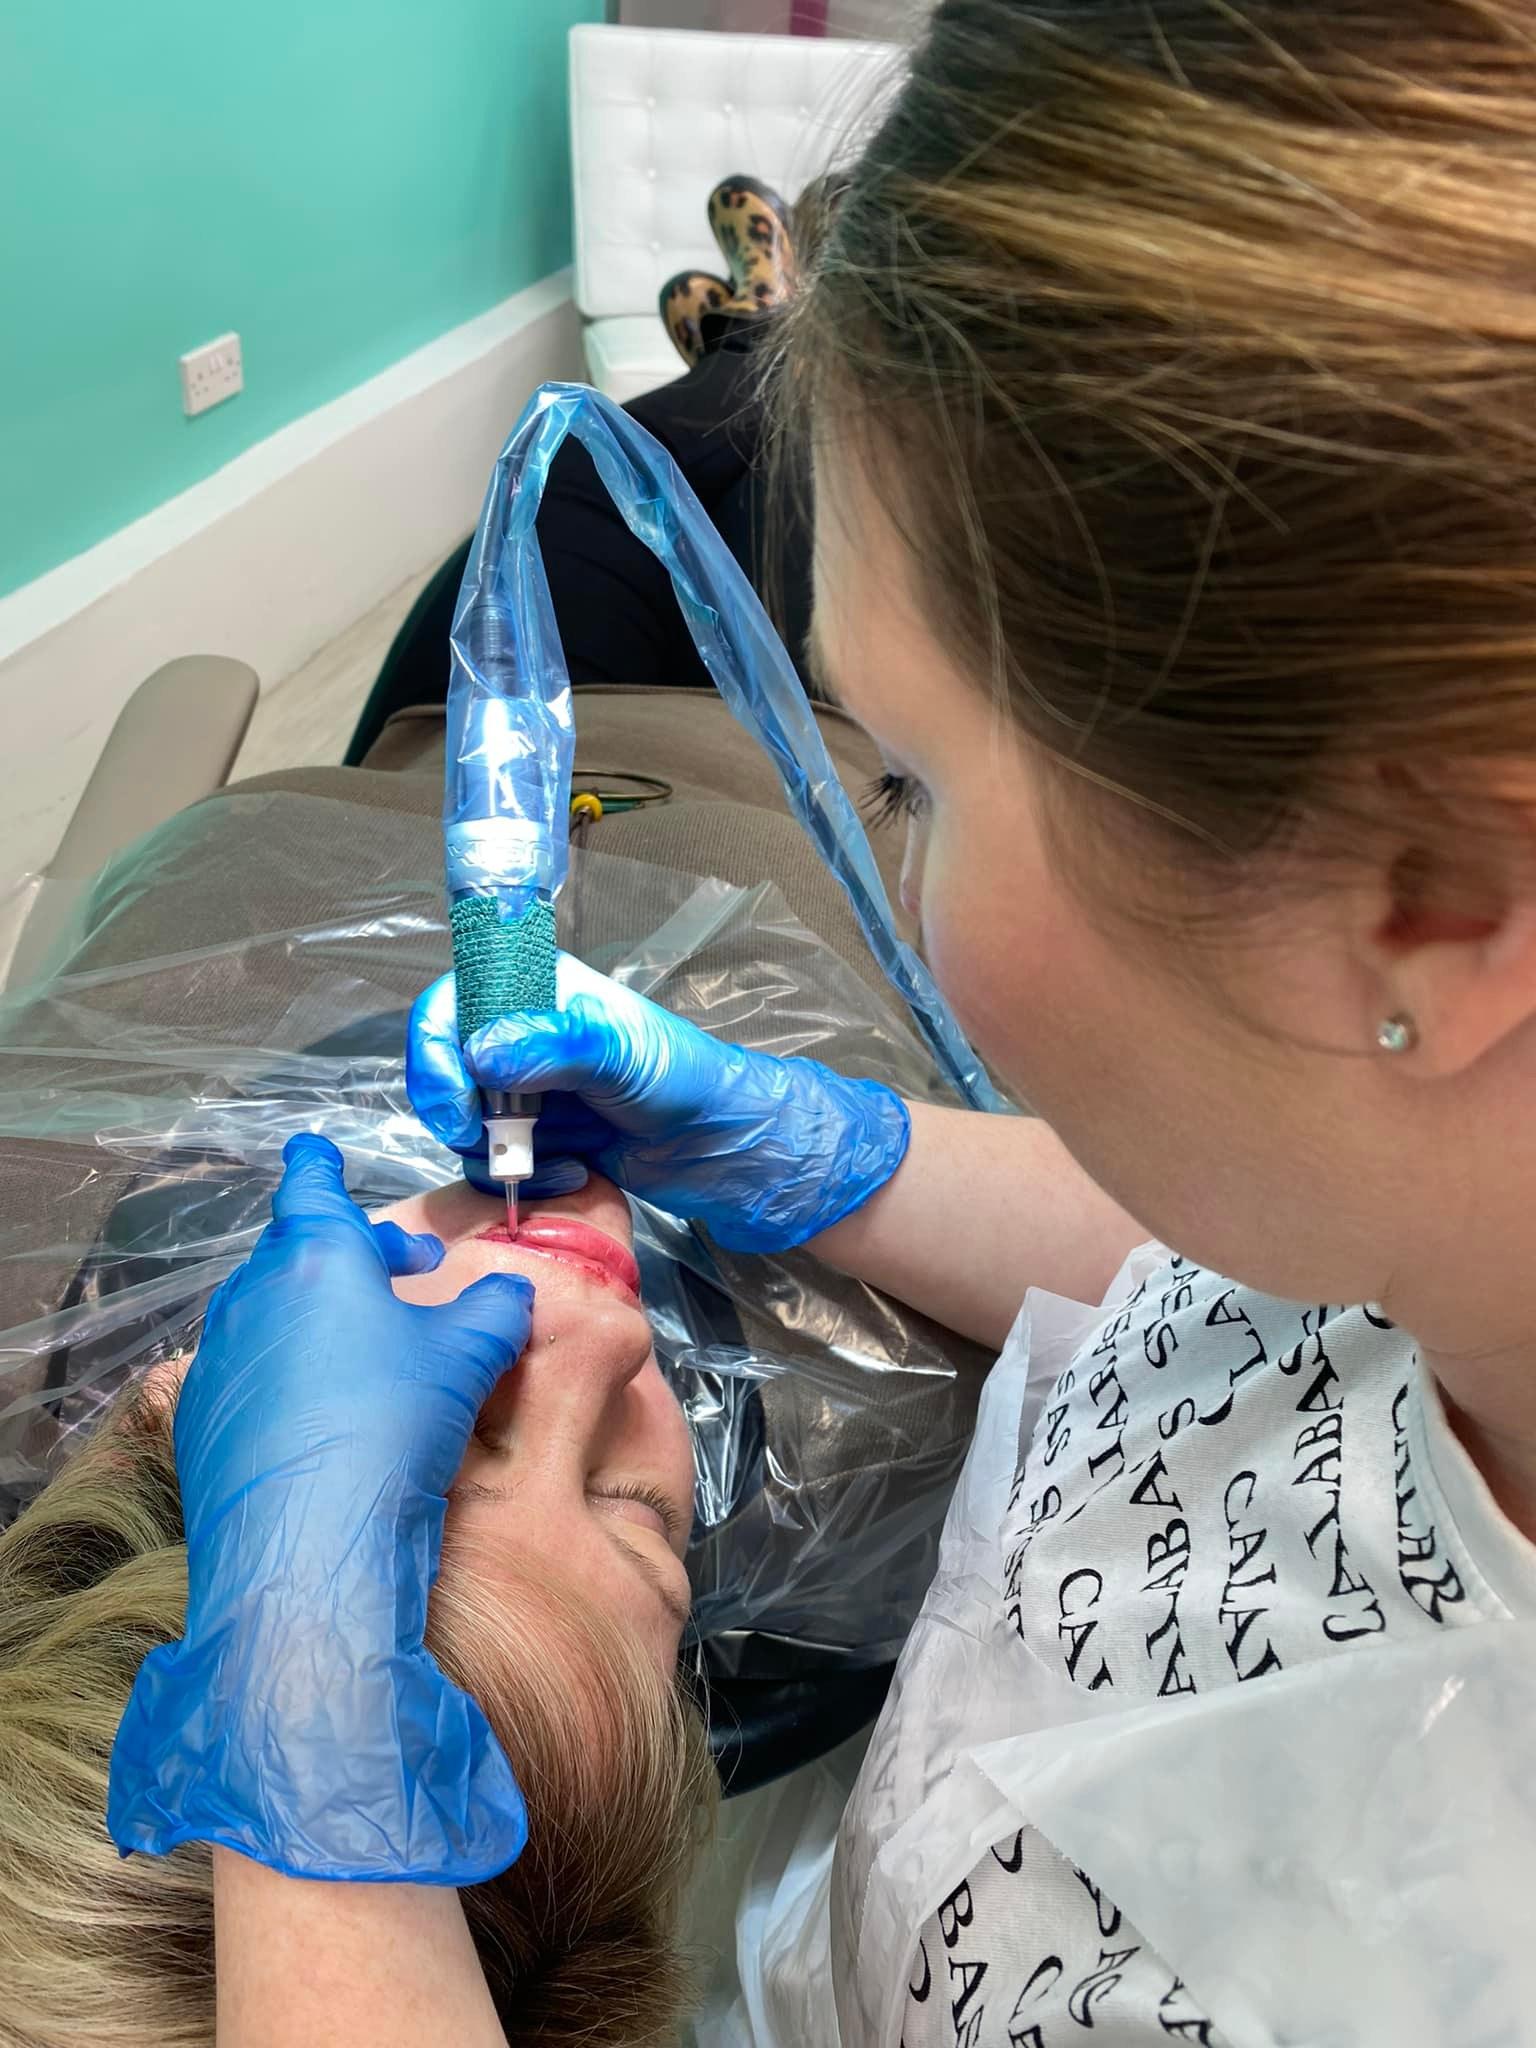 Del tattooing permanent lips on her client